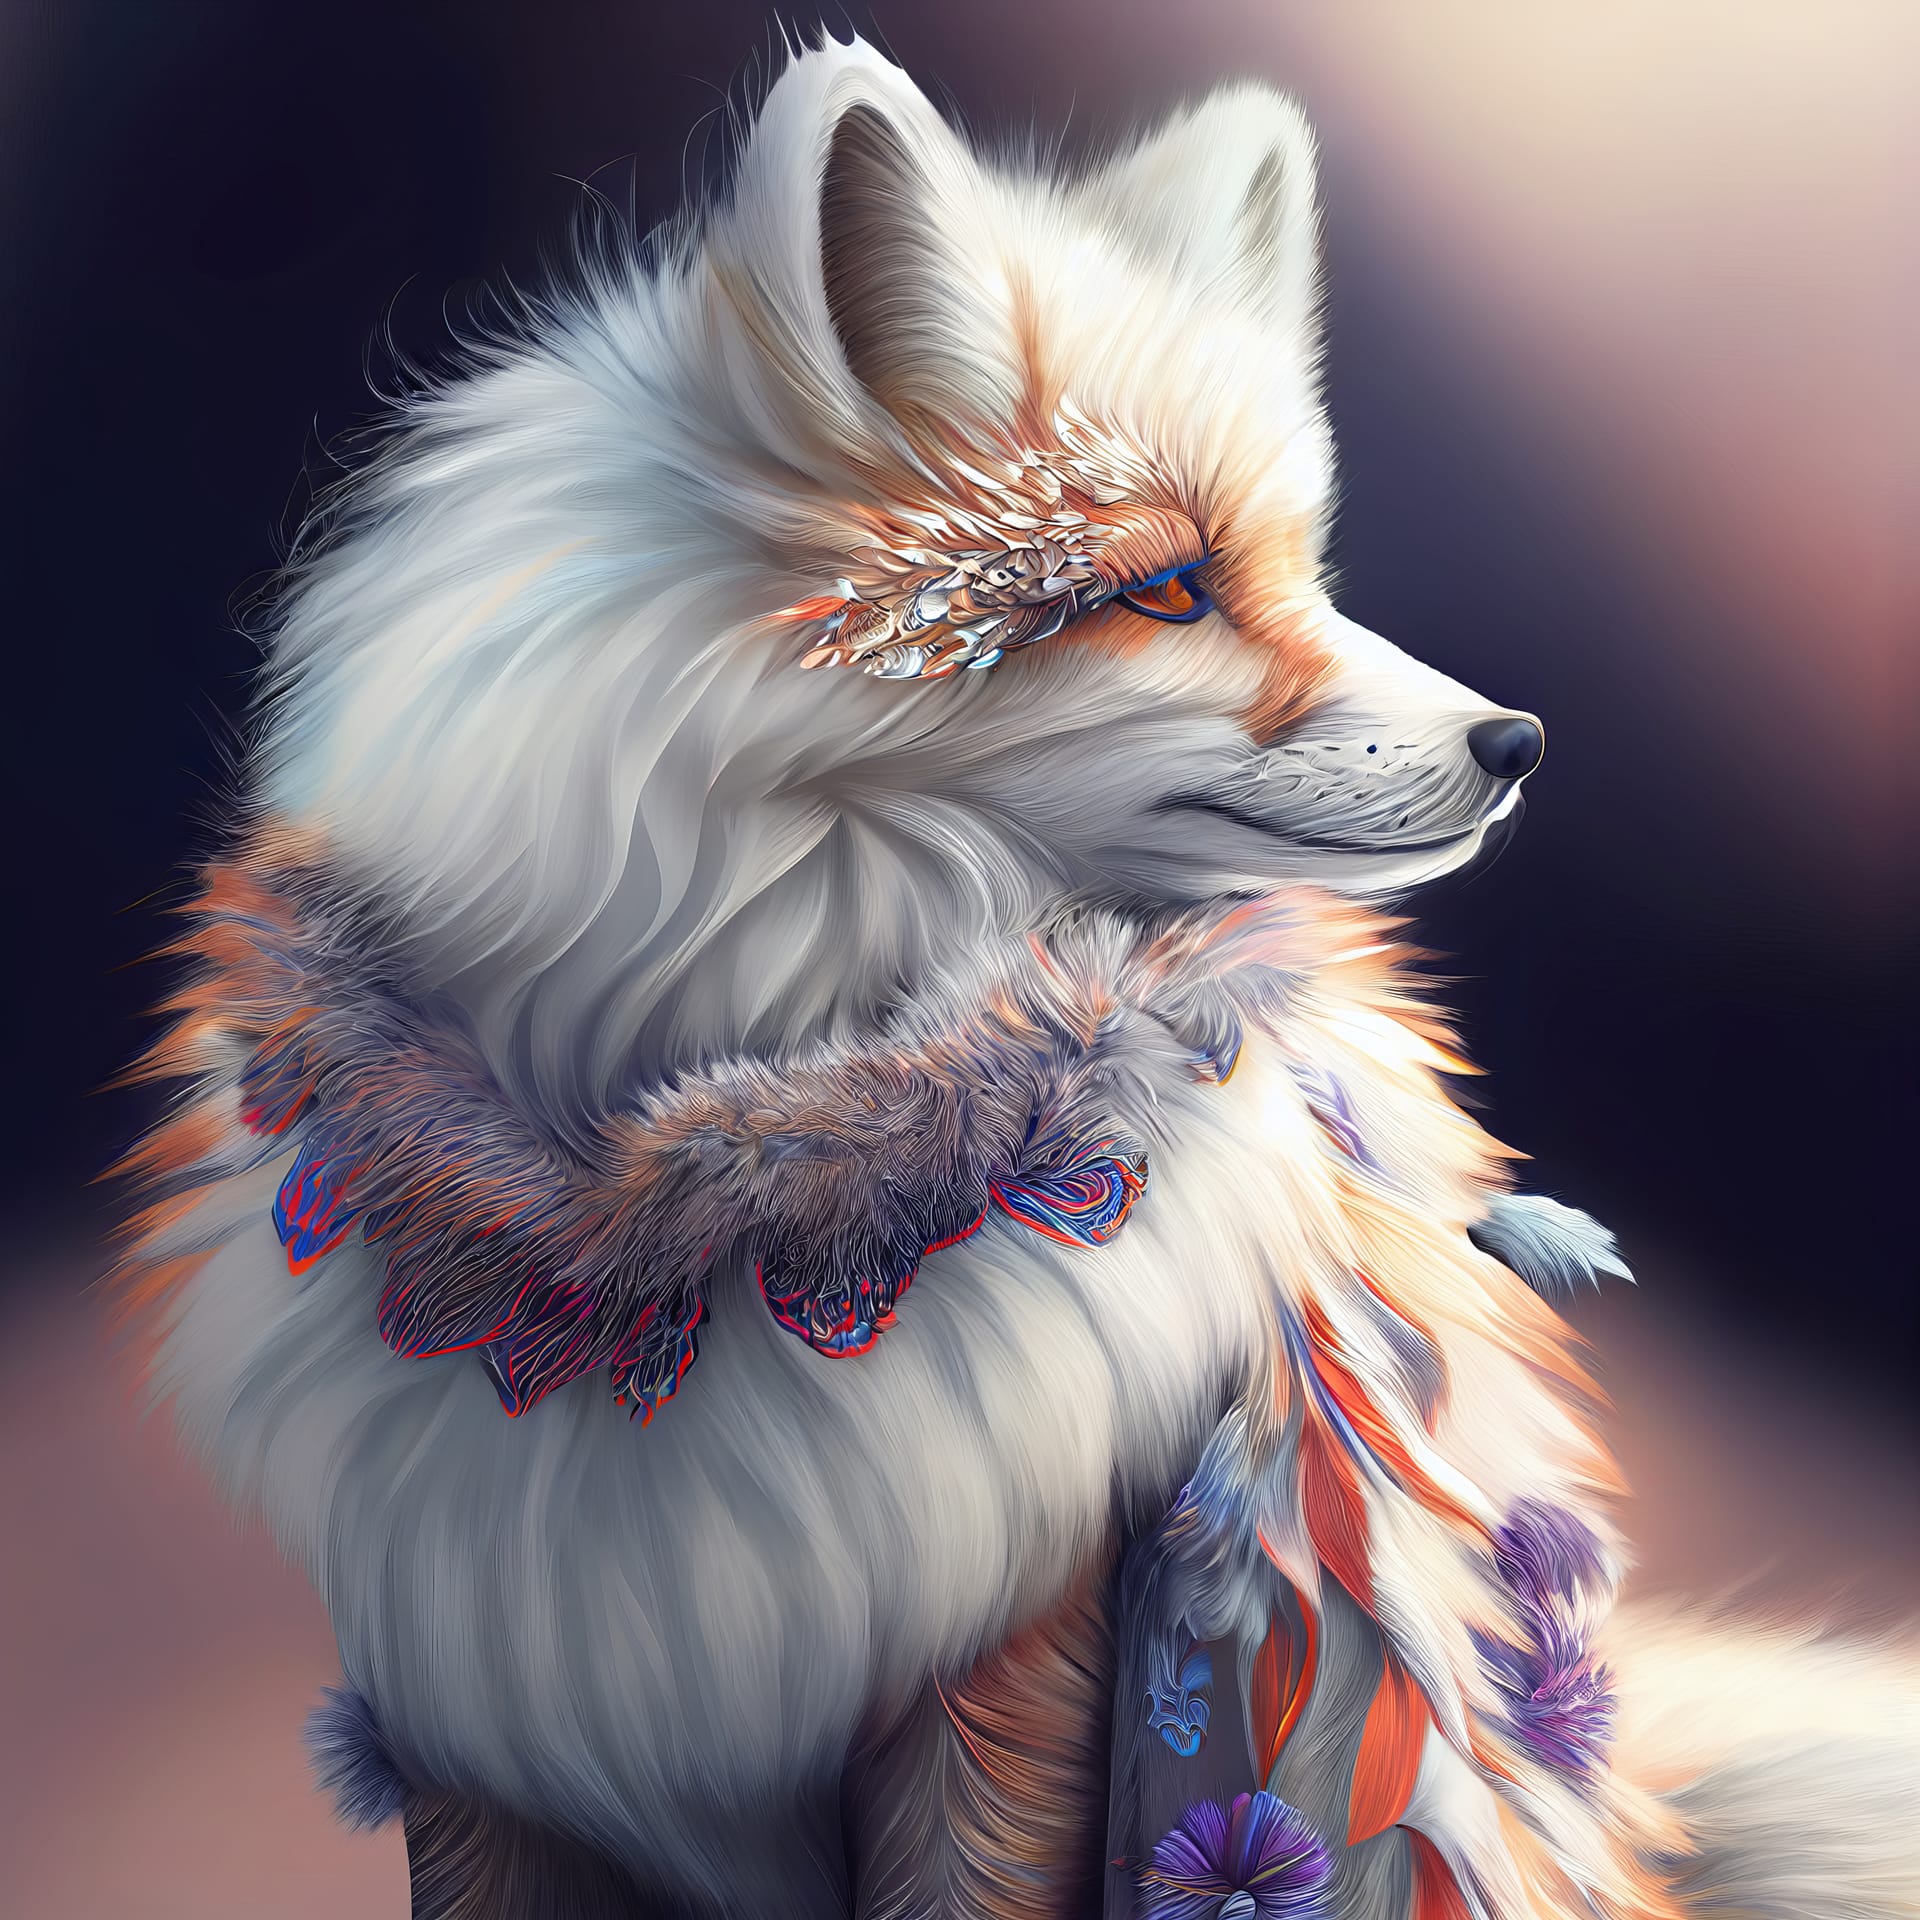 Magic fox with natural decorations fluffy white fur looking away